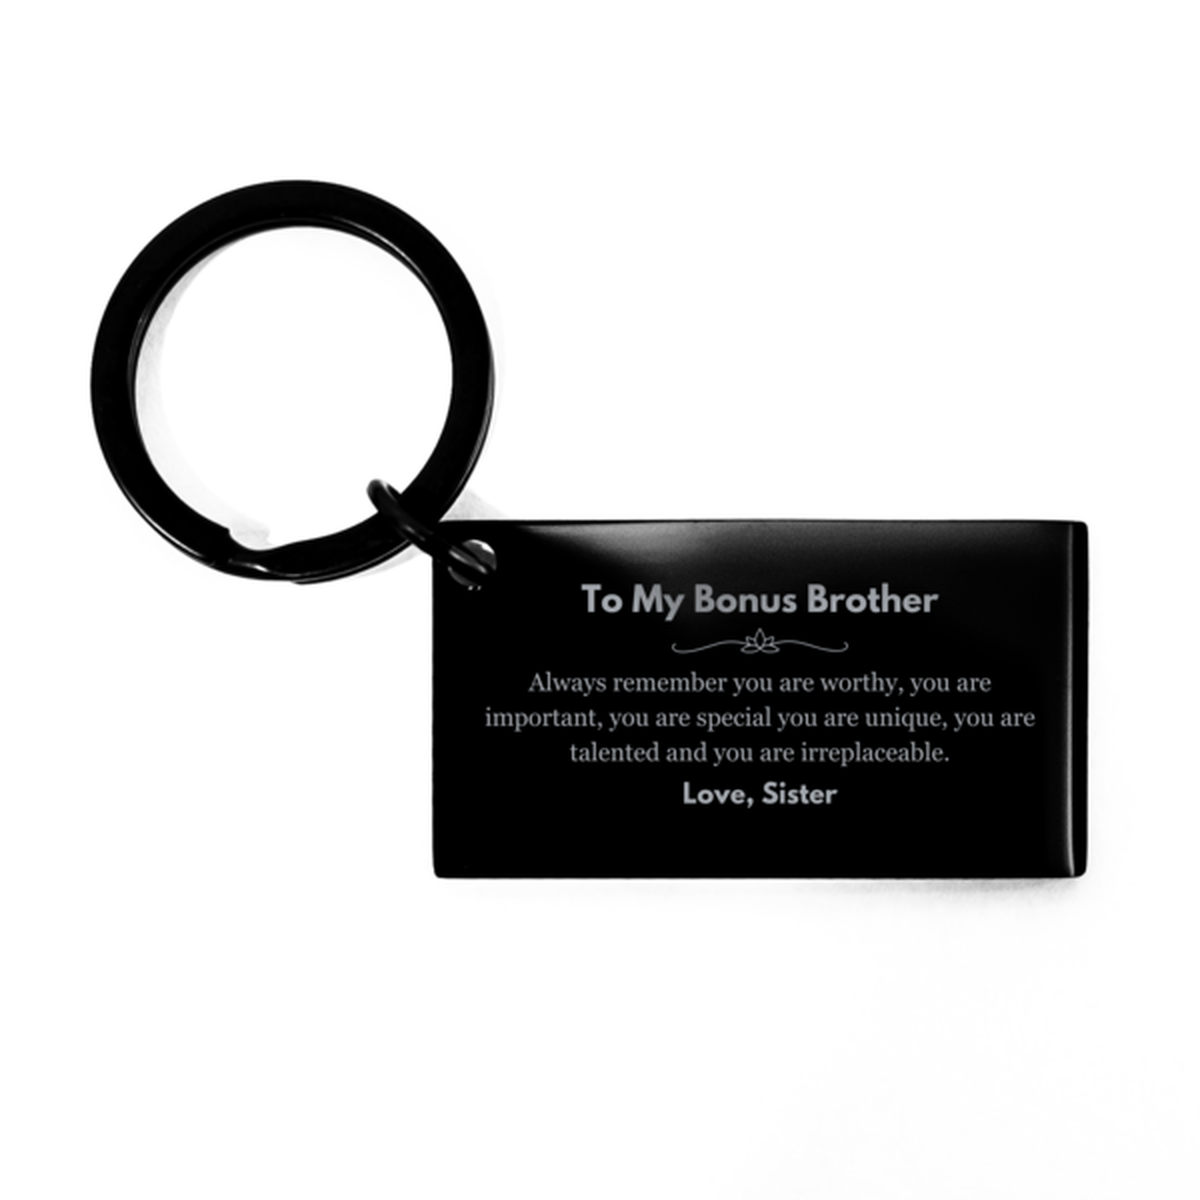 Bonus Brother Birthday Gifts from Sister, Inspirational Keychain for Bonus Brother Christmas Graduation Gifts for Bonus Brother Always remember you are worthy, you are important. Love, Sister